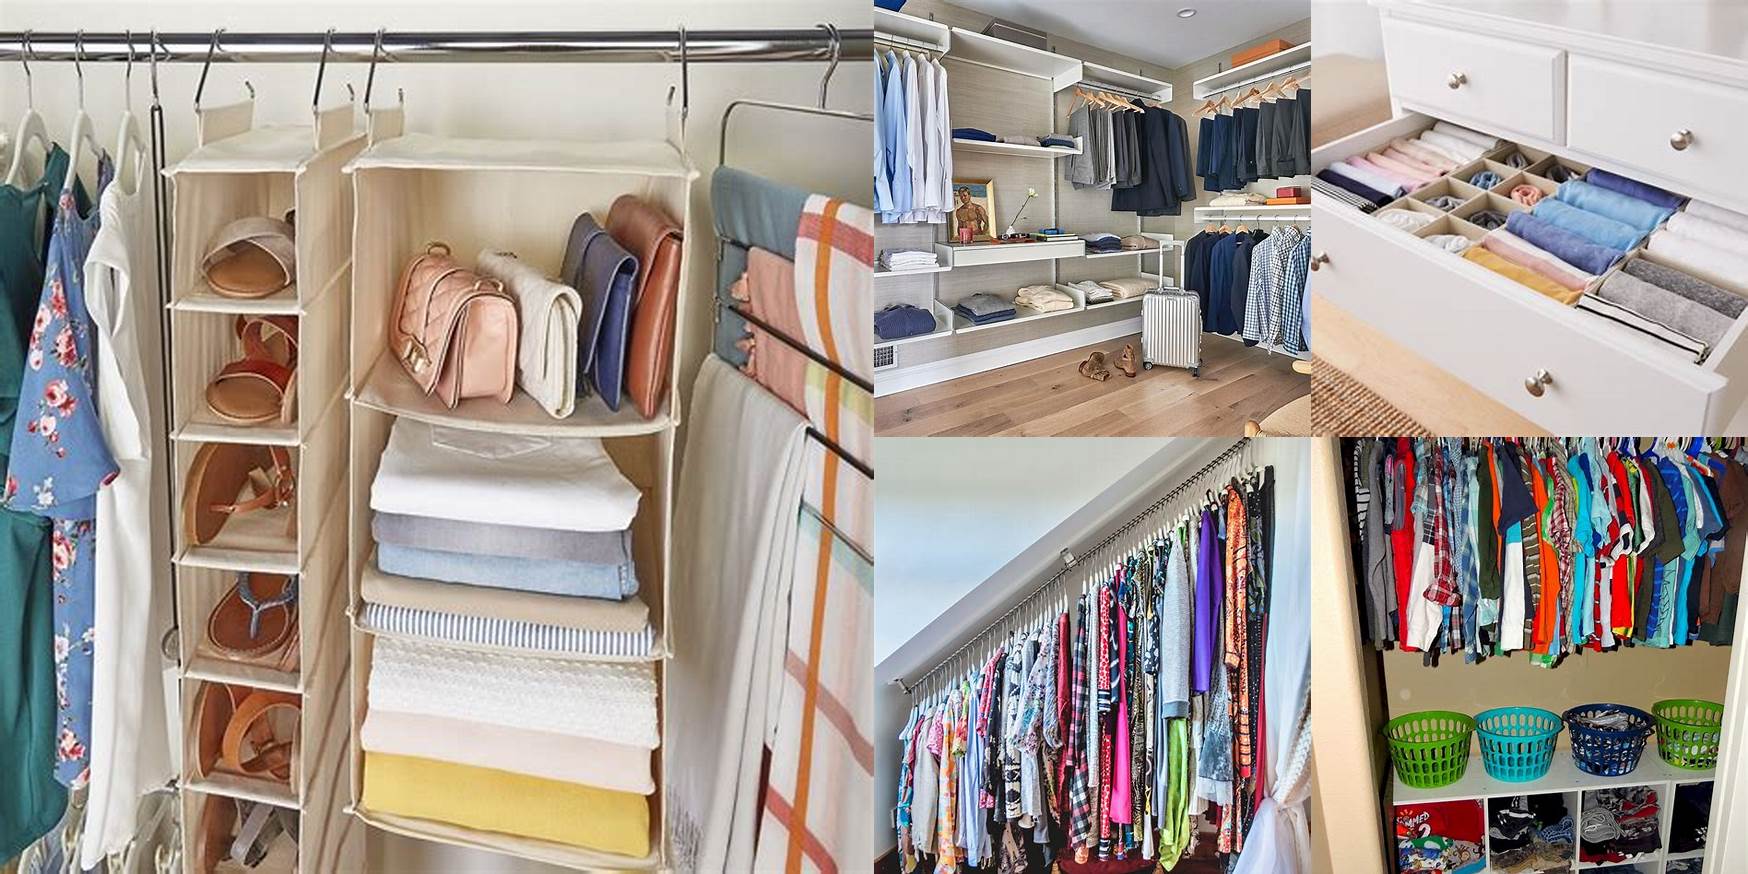 How To Store Clothes In Storage Unit